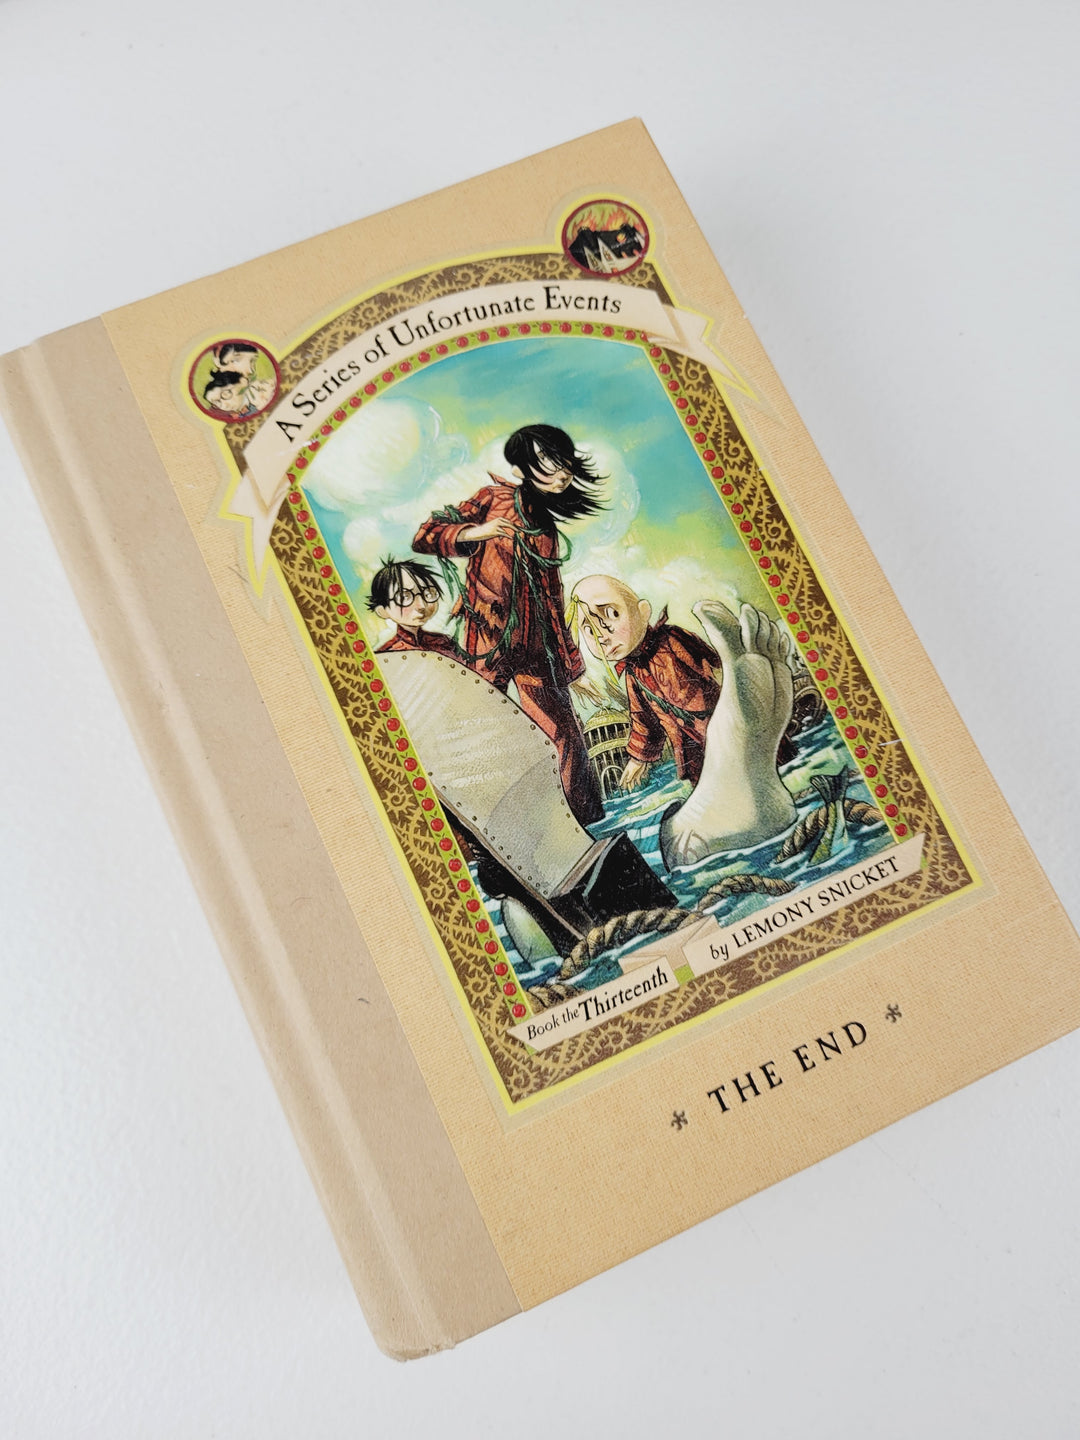 A SERIES OF UNFORTUNATE EVENTS: THE END BOOK 13 HARDCOVER